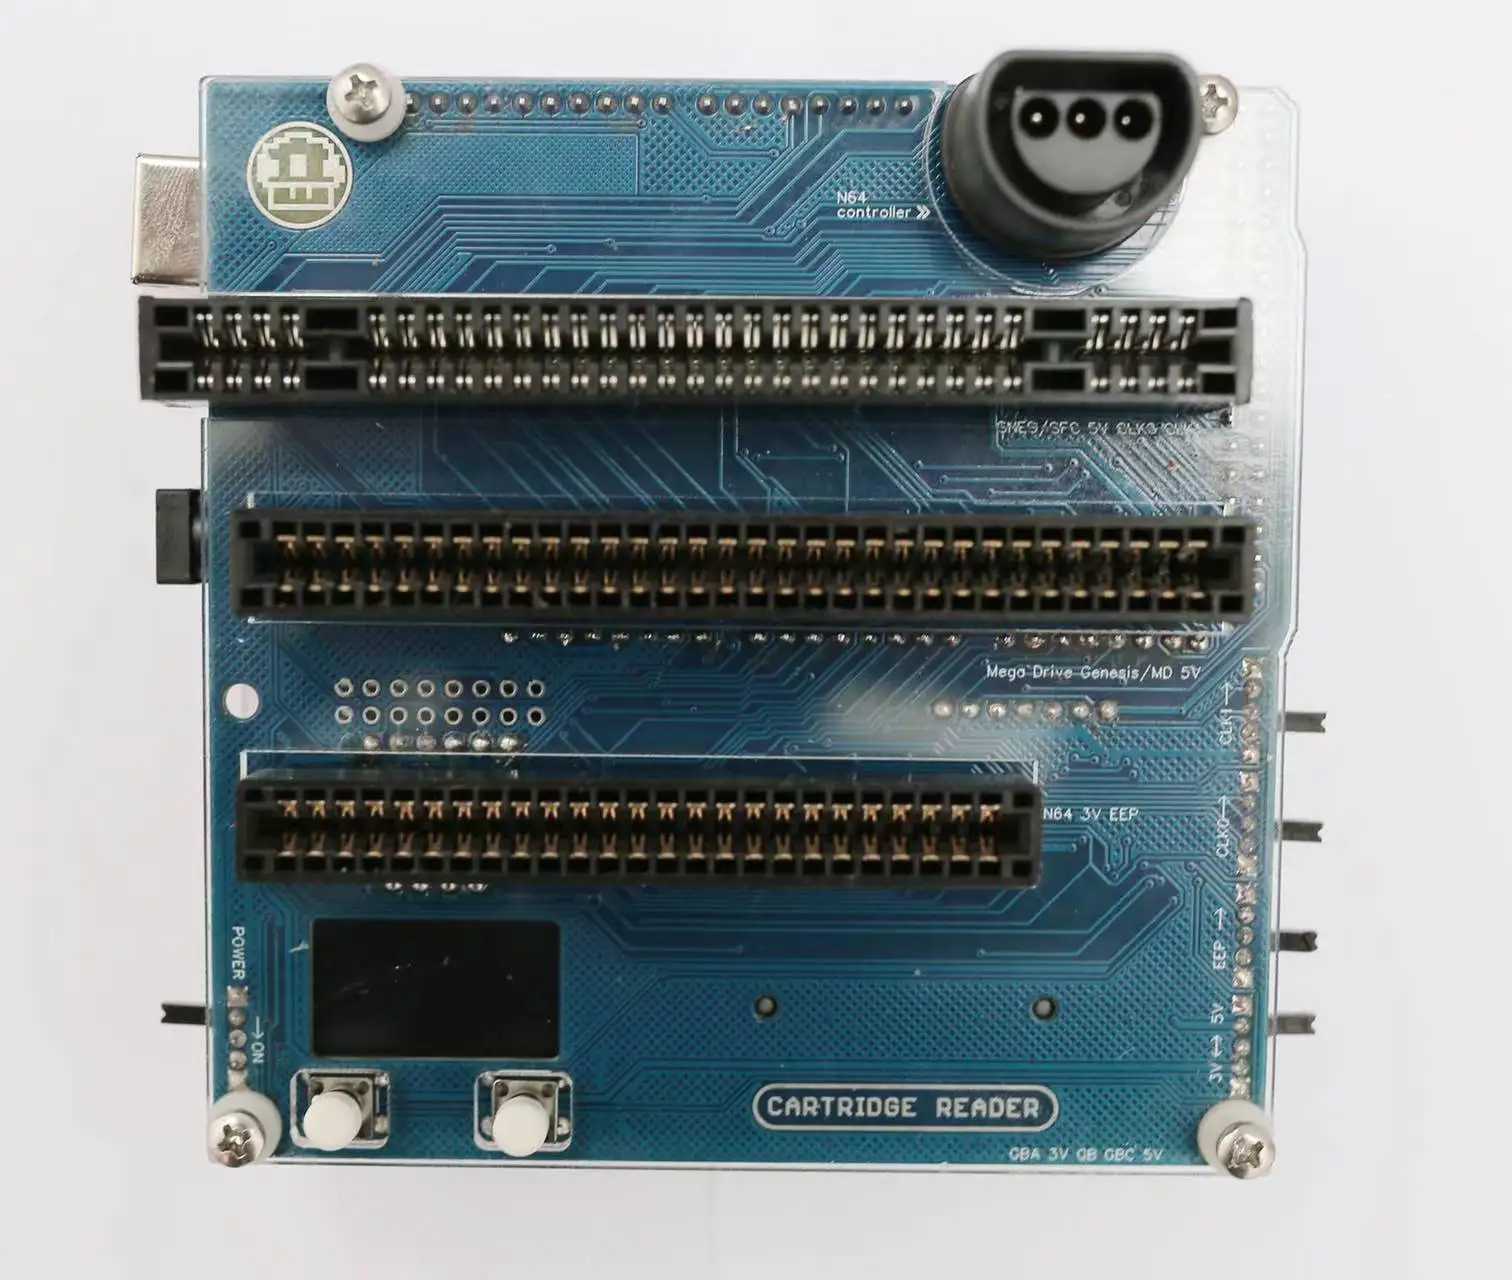 

6 In 1 Open Source Cartridge Reader V3 Retro Games Dumper Support NES, SNES, N64, GBA, GB/GBC, and Genesis Cartridges